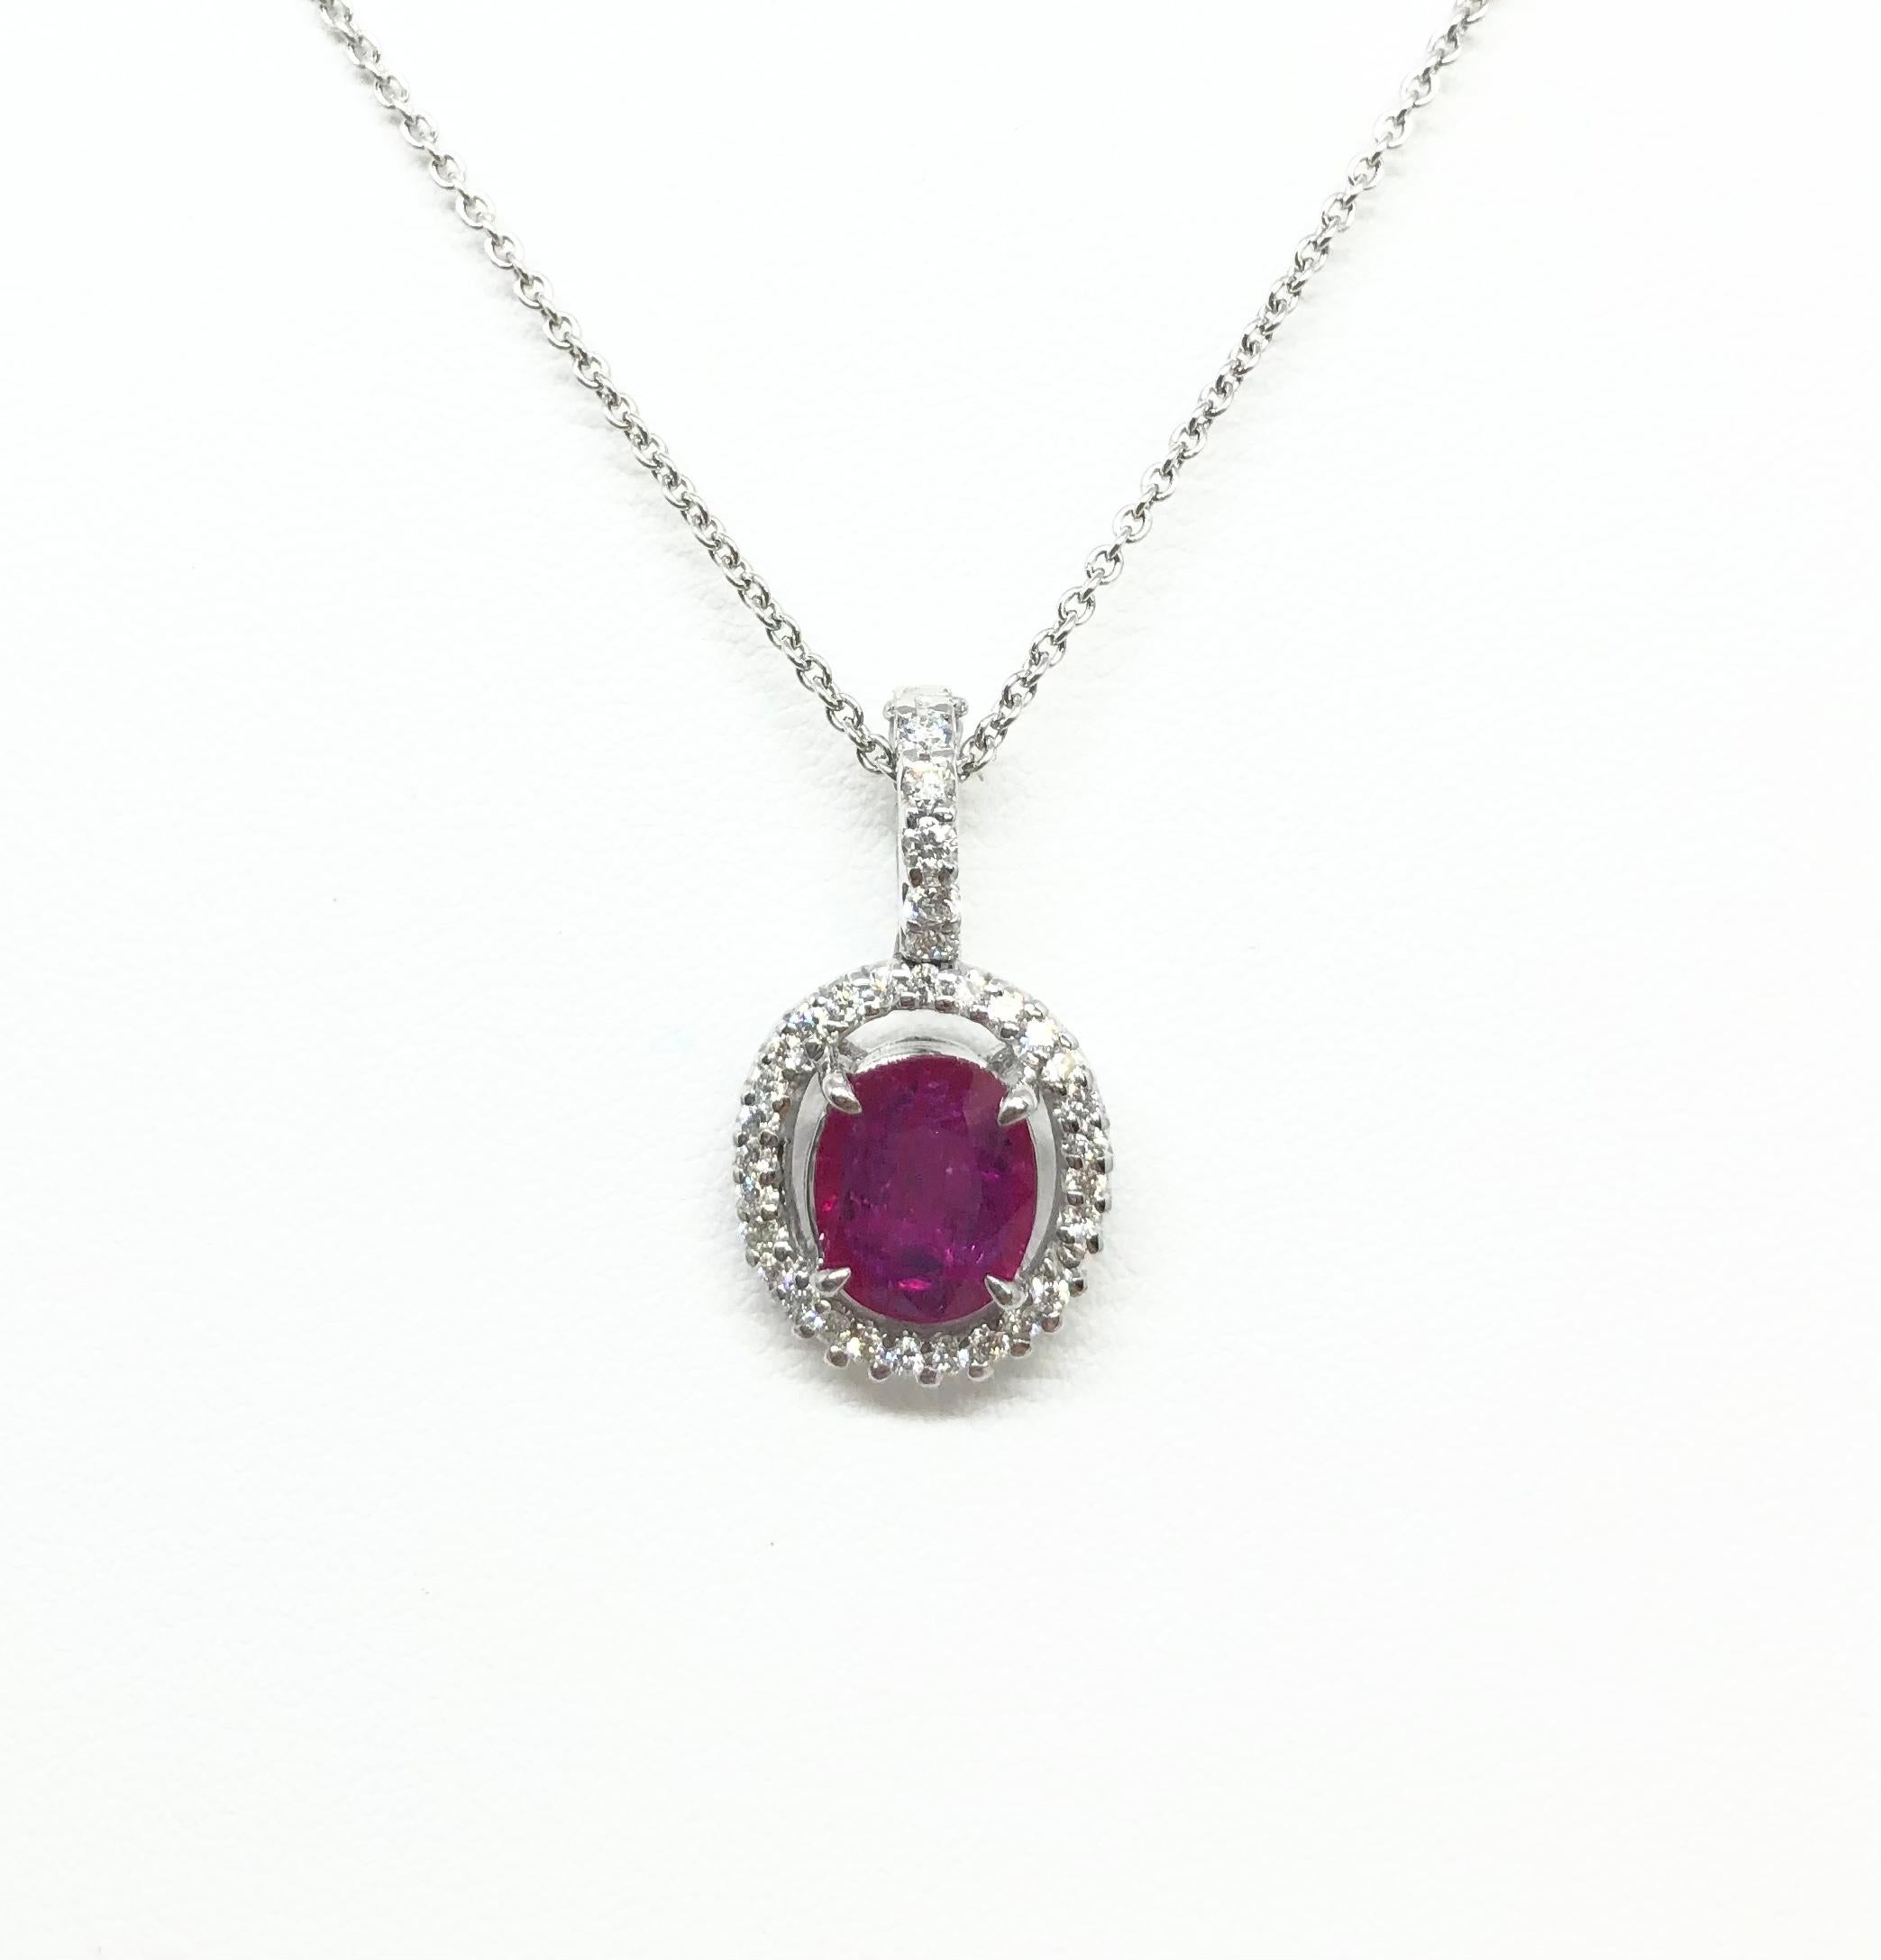 Ruby 1.33 carats with Diamond 0.36 carat Pendant set in 18 Karat White Gold Settings
(chain not included)

Width: 1.3 cm 
Length: 2.4  cm
Total Weight: 3.66 grams

